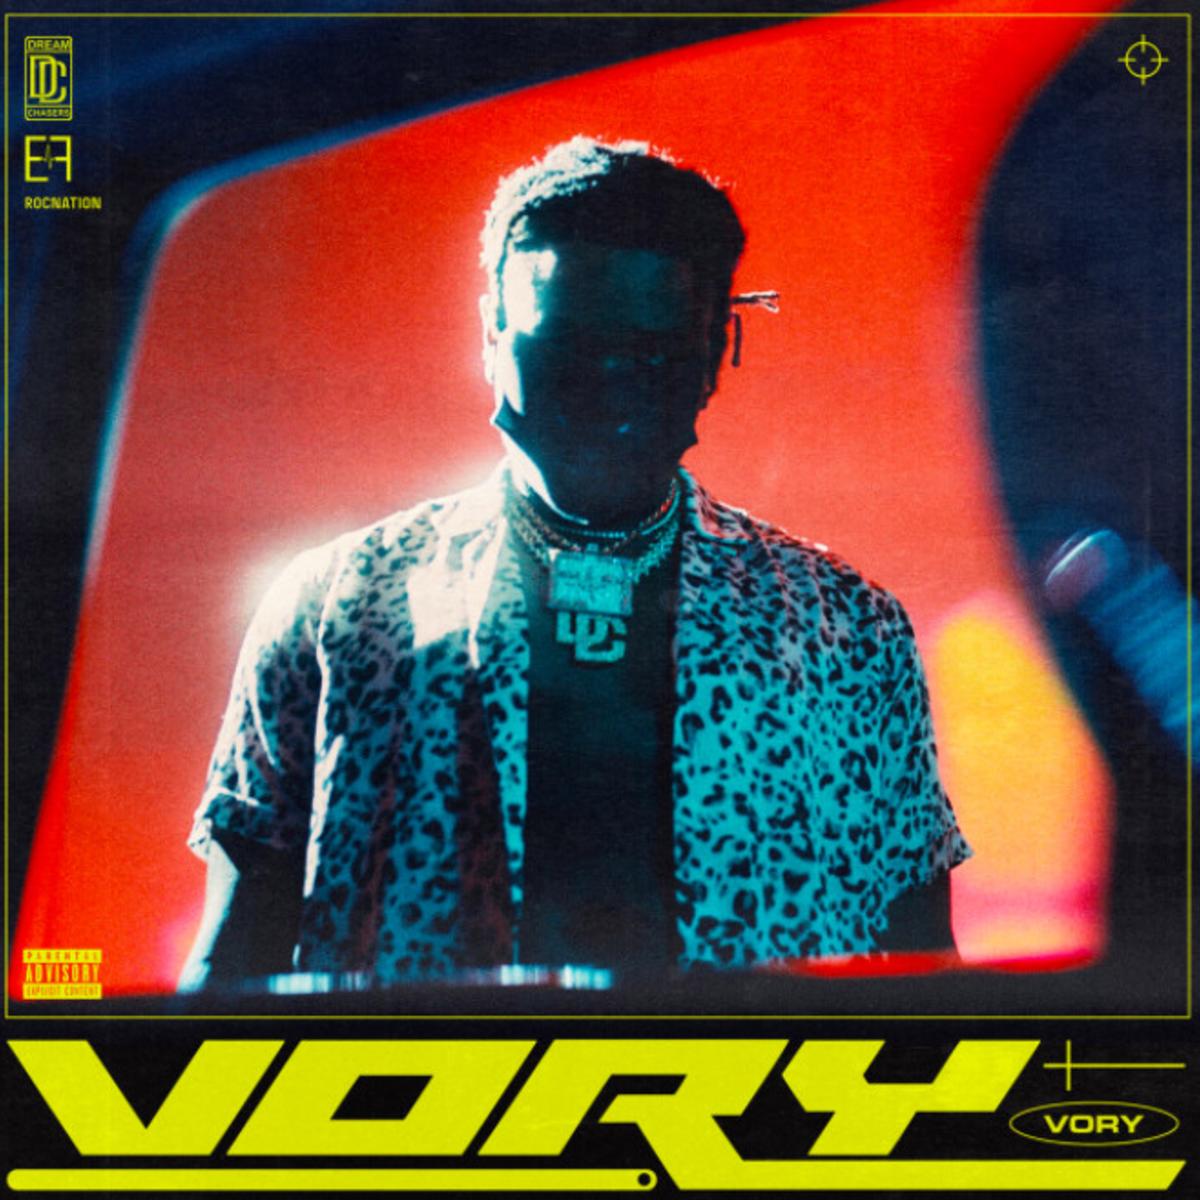 Listen To Vory Self-Titled Project “Vory”